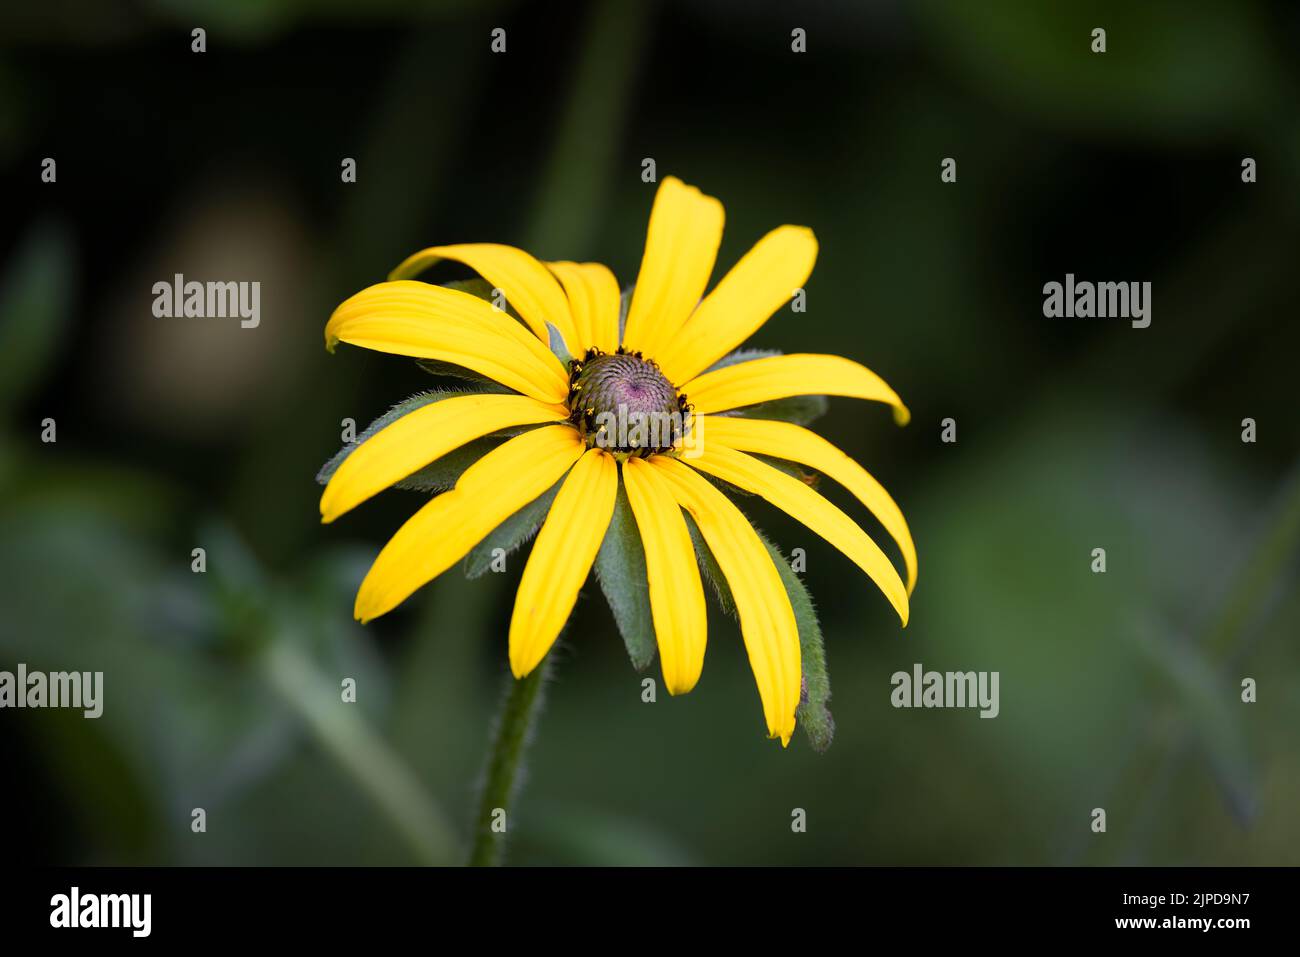 A beautiful bright yellow Rudbeckia flower, isolated against an out of focus green background Stock Photo